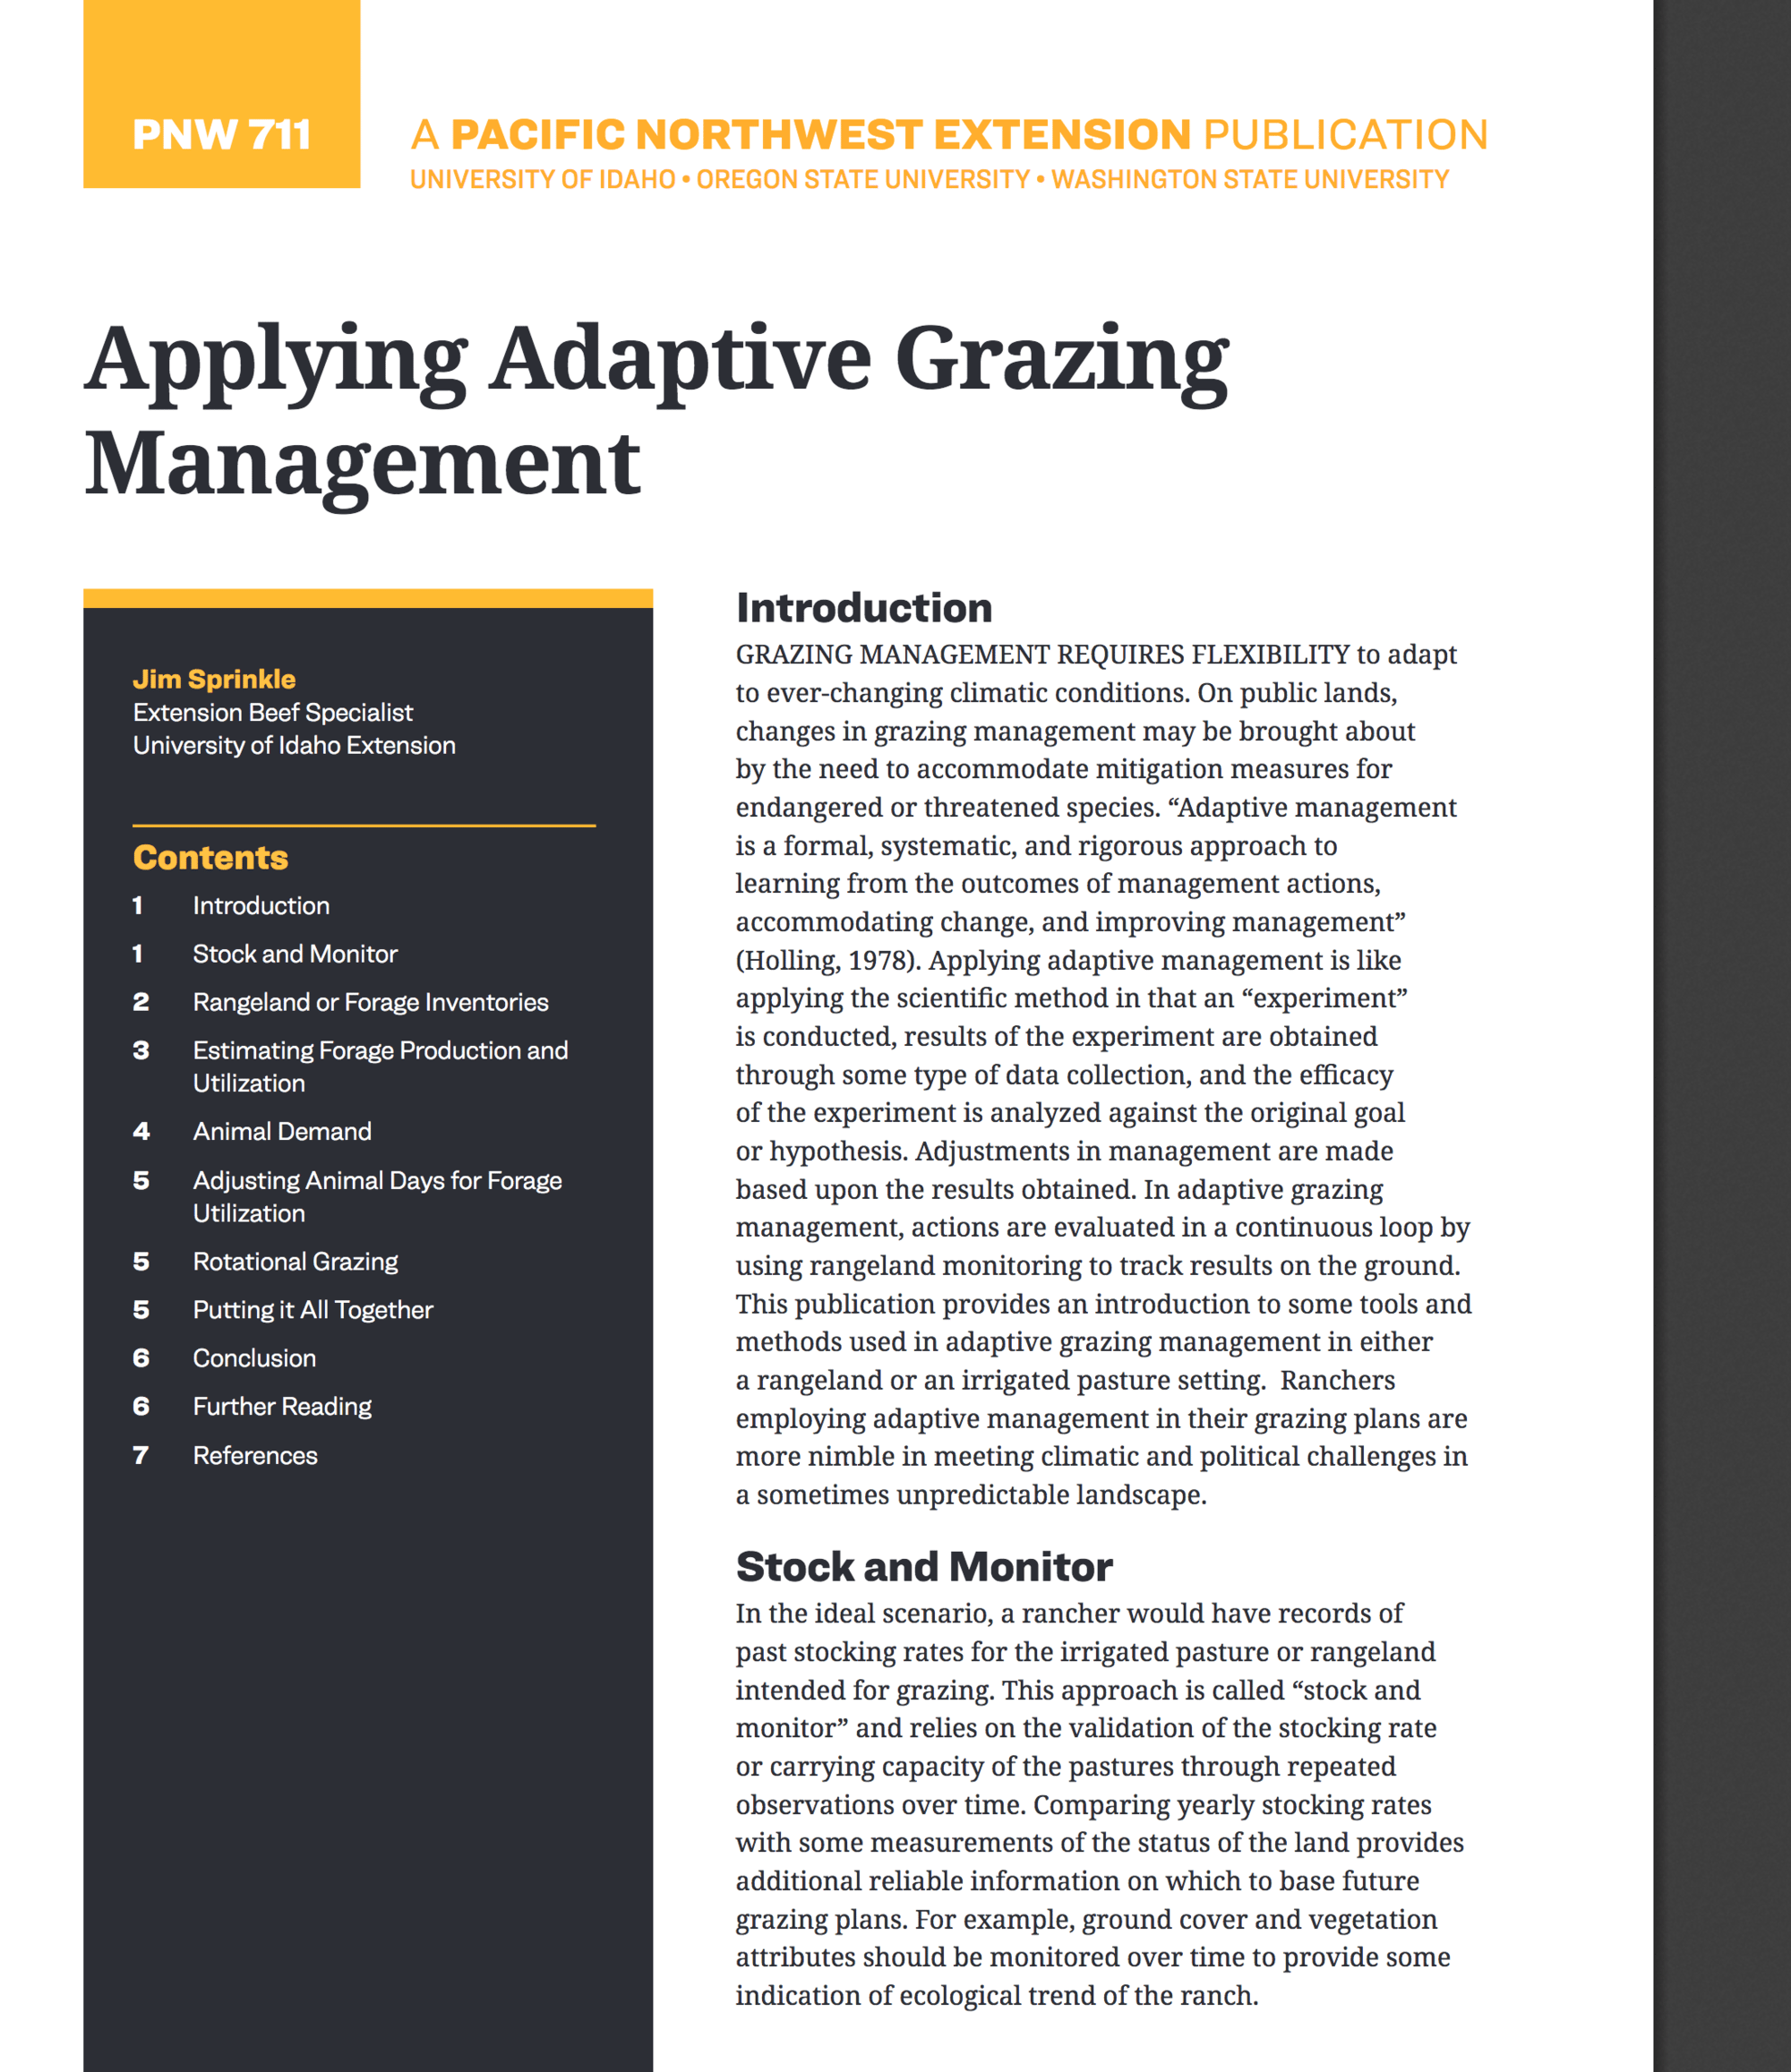 cover image of "Applying Adaptive Grazing Management" publication